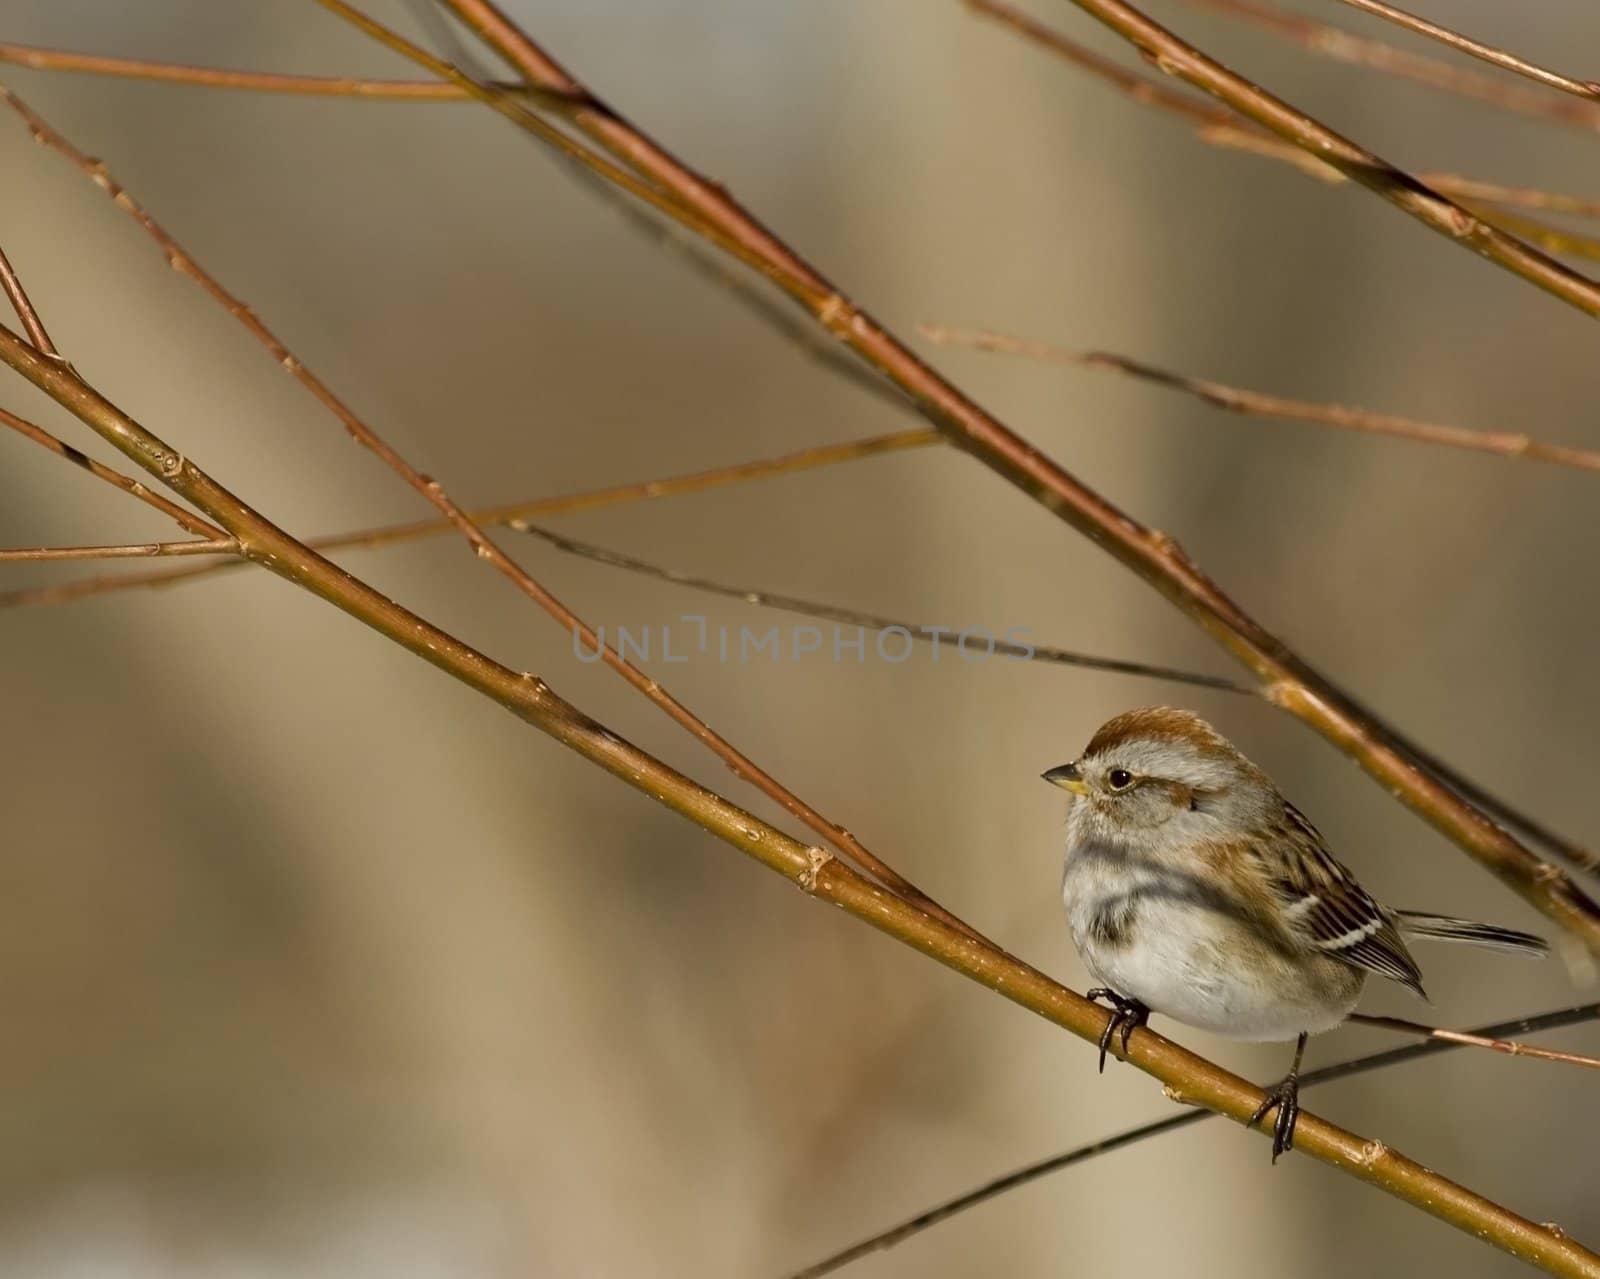 A tree sparrow perched o a tree branch.